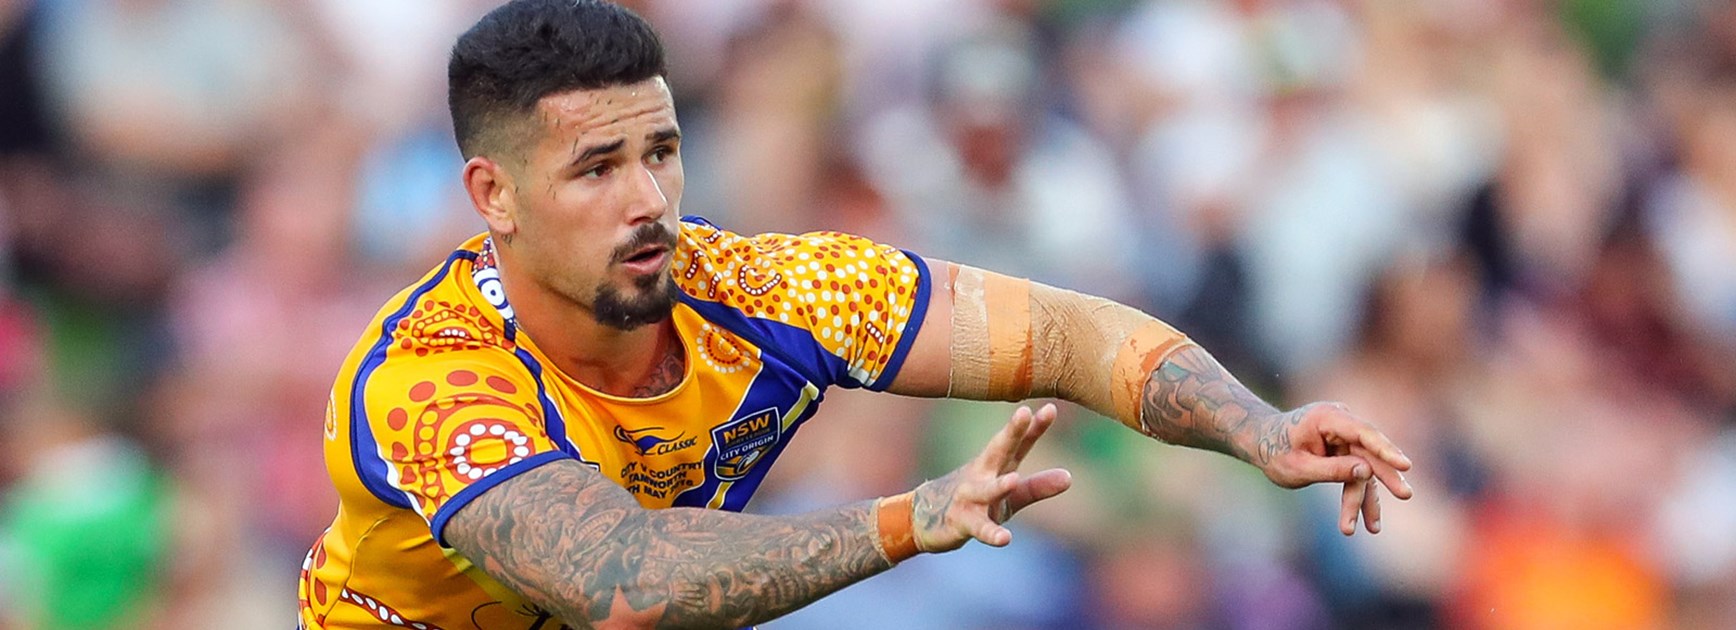 City hooker Nathan Peats is a good chance of playing for NSW according to new Titans teammate Greg Bird.